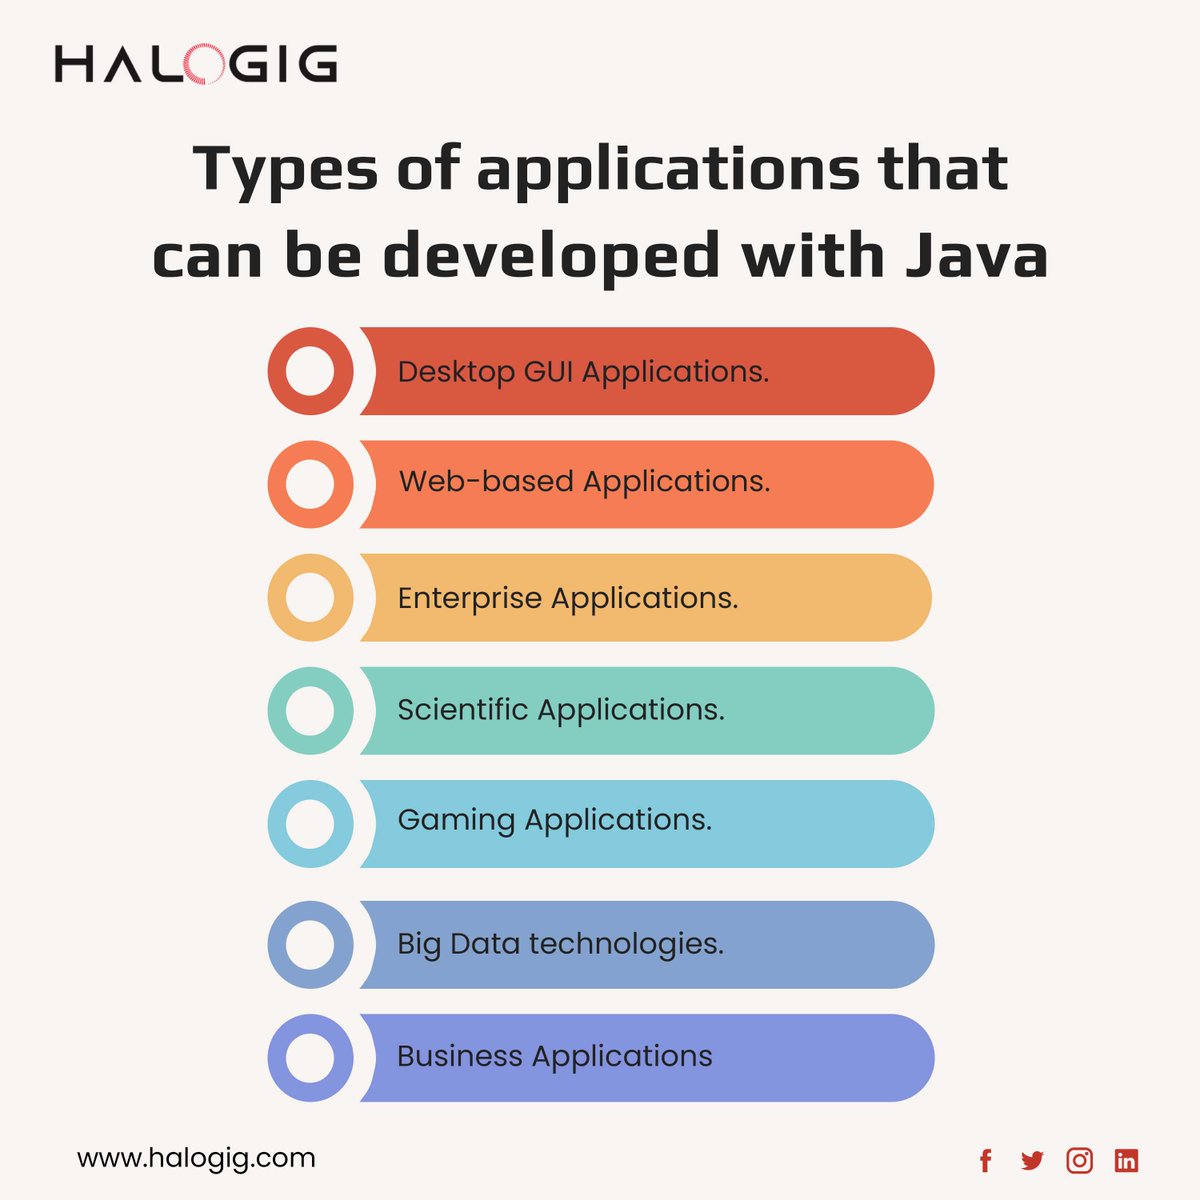 Java is a powerful language that can be used to create a wide range of applications, from web-based applications to desktop applications to mobile applications.
#JavaProgramming #WebDevelopment #DesktopApps #MobileApps #CodeEverything #ProgrammersChoice #TechInnovation #halogig